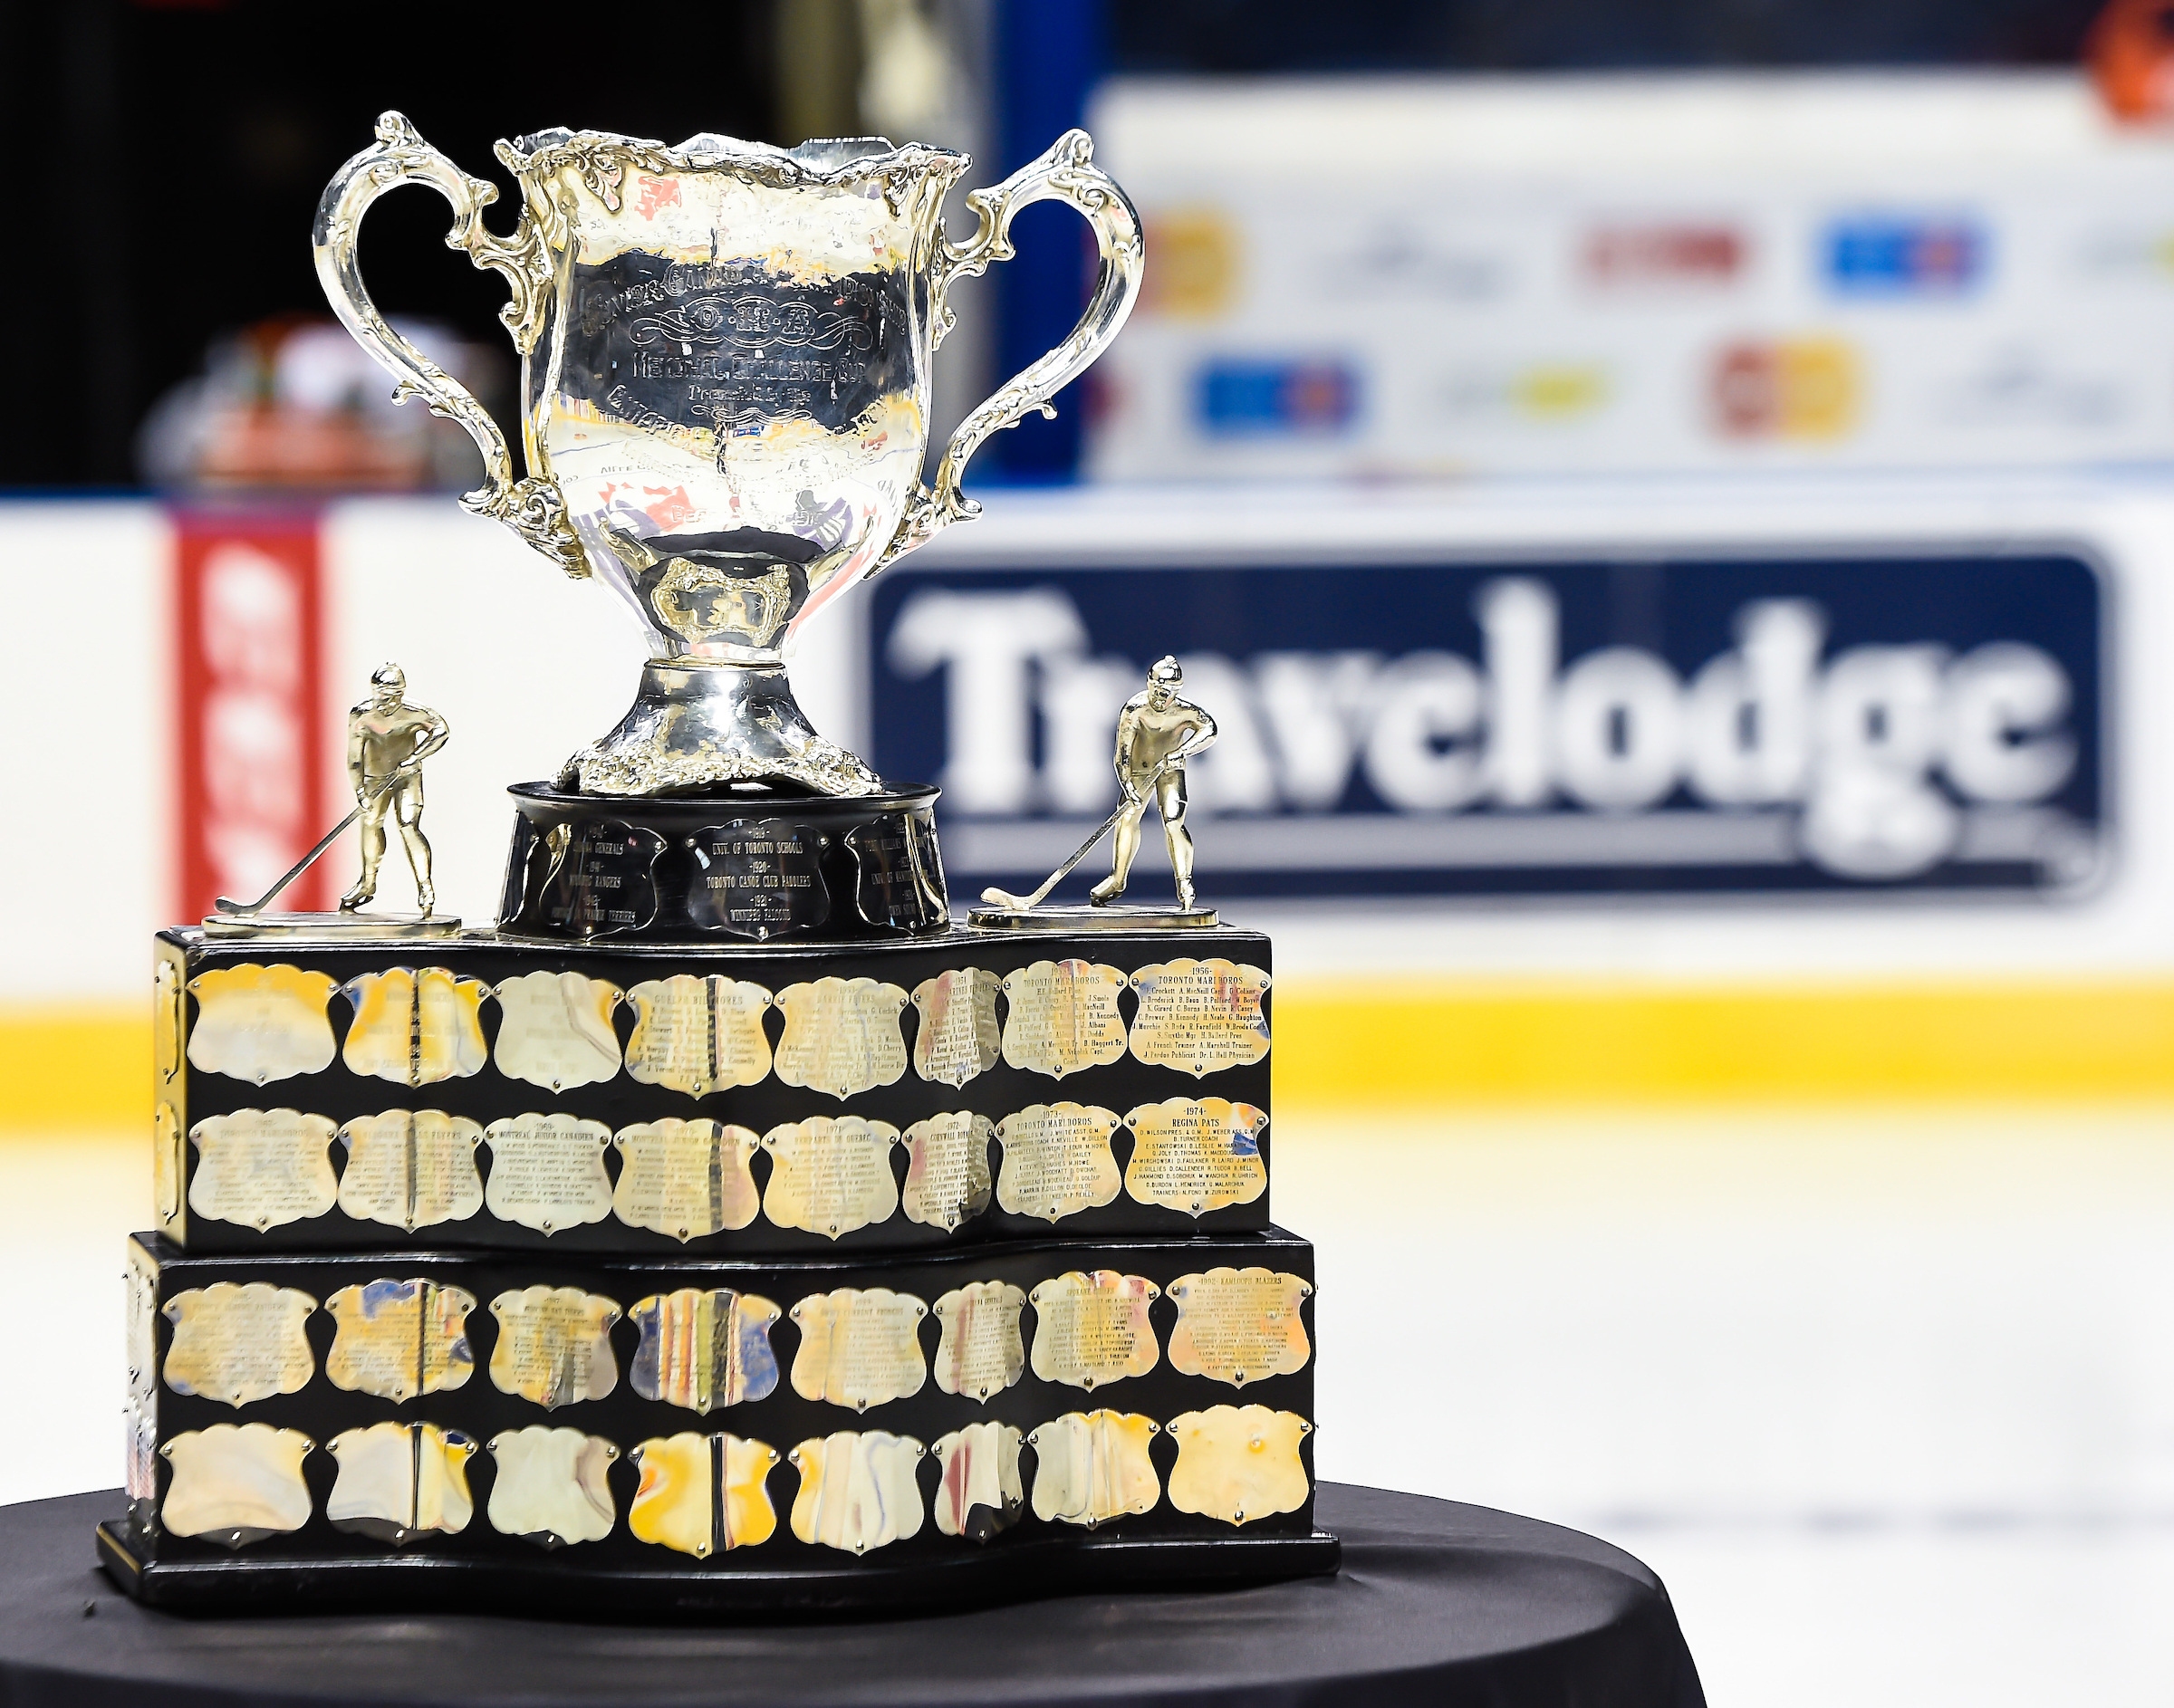 Memorial Cup 2023: Dylan Guenther, Logan Stankoven among top 10